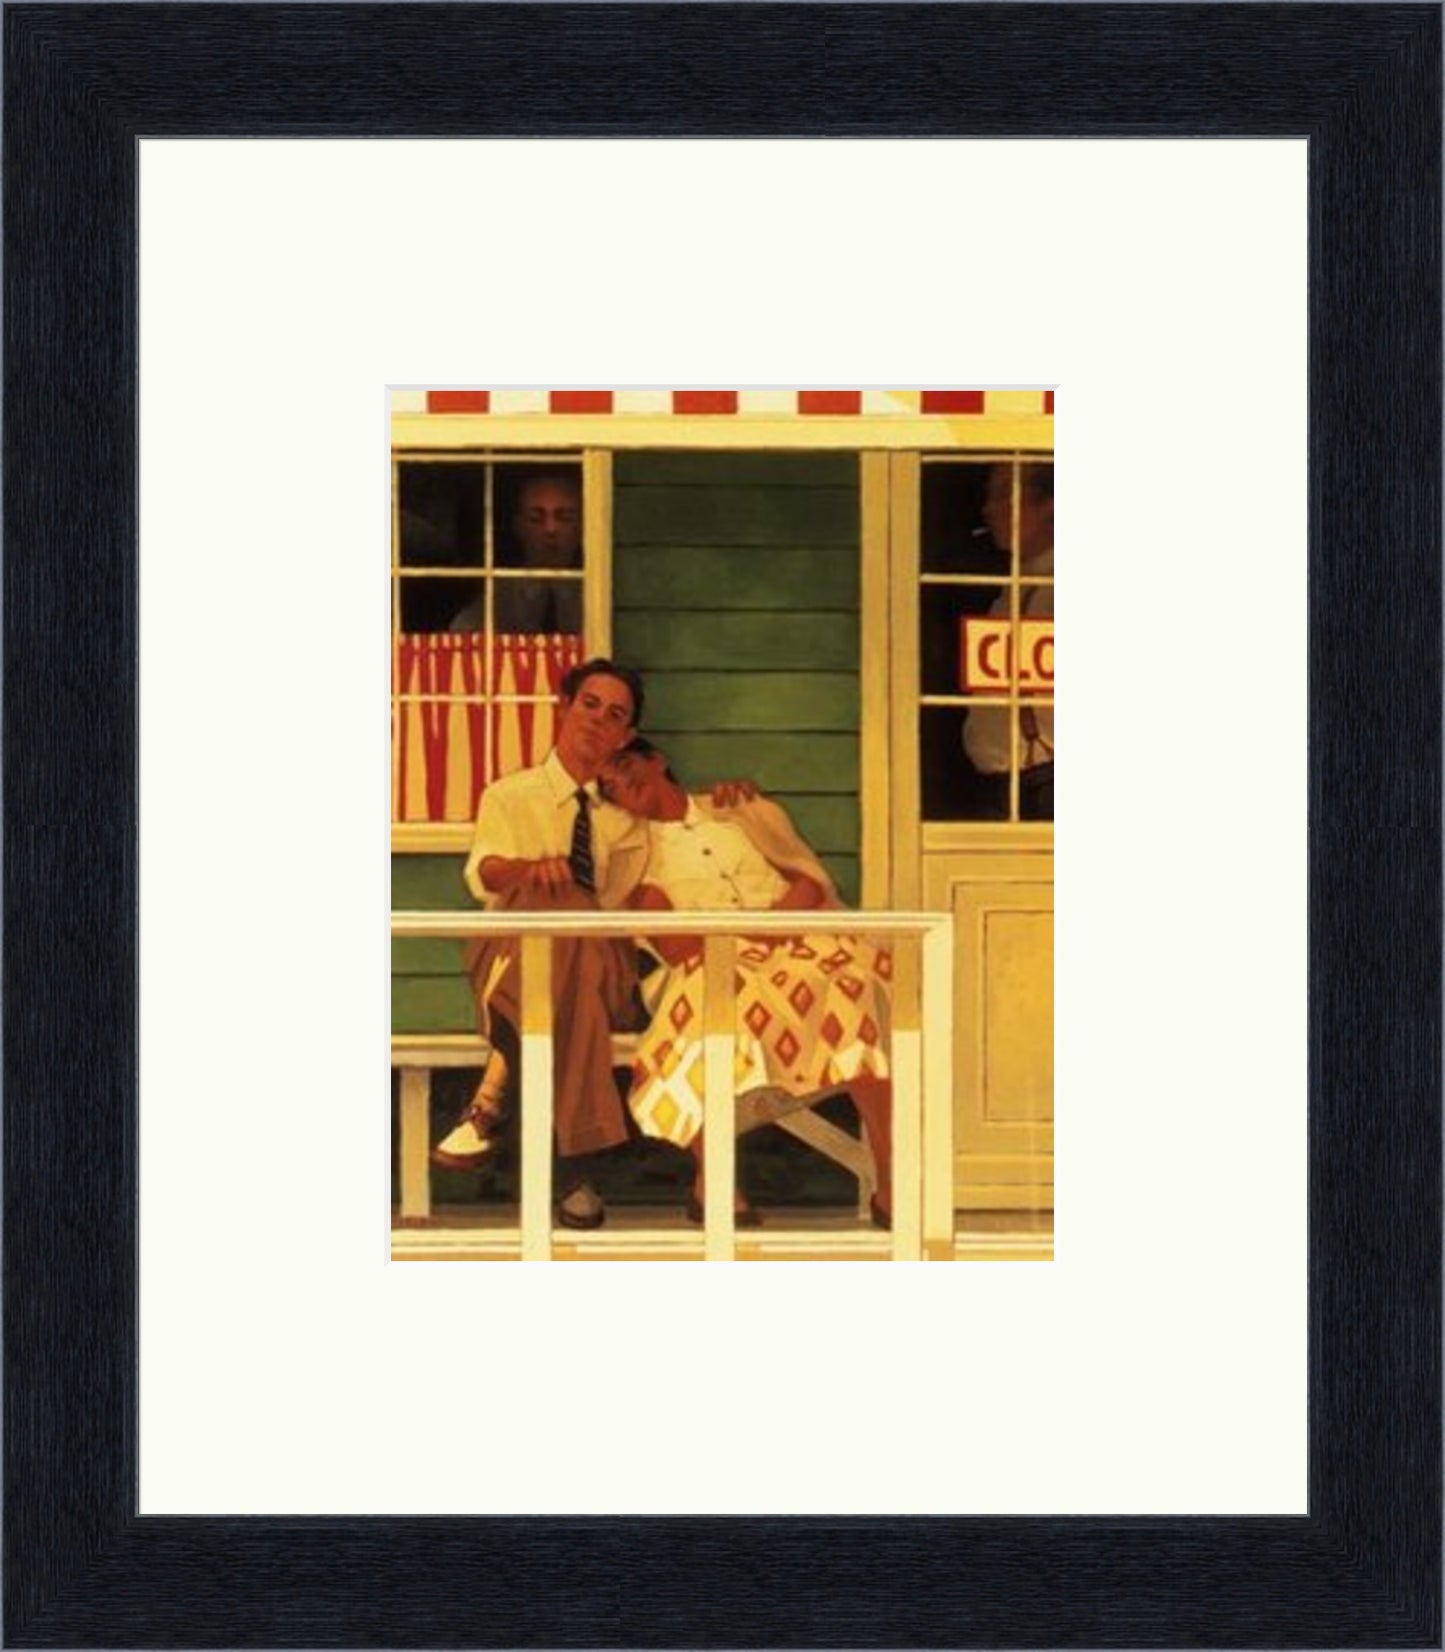 The Innocents by Jack Vettriano - Petite